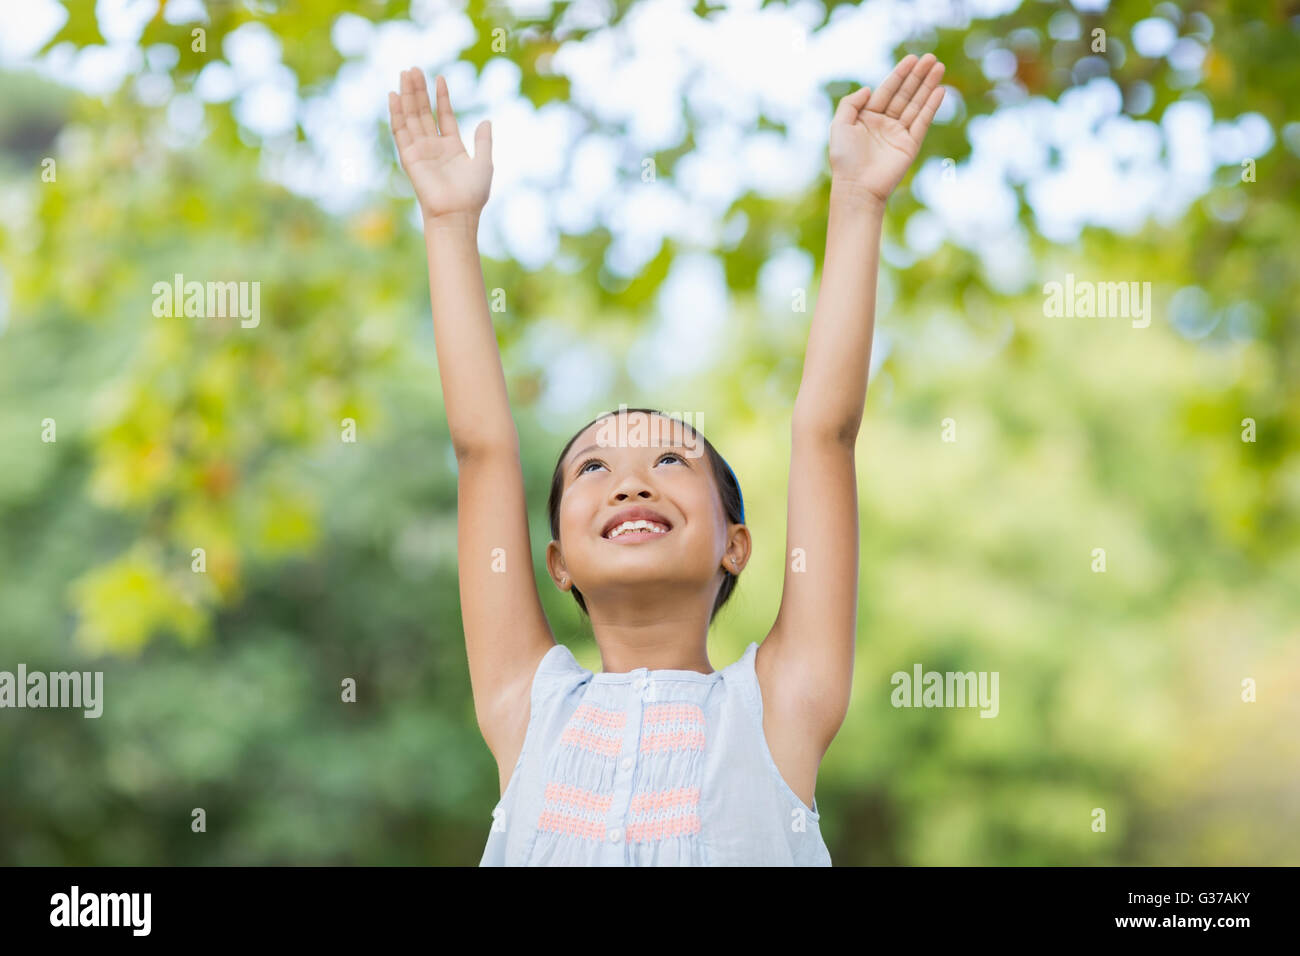 Smiling Girl standing with arms raised Banque D'Images